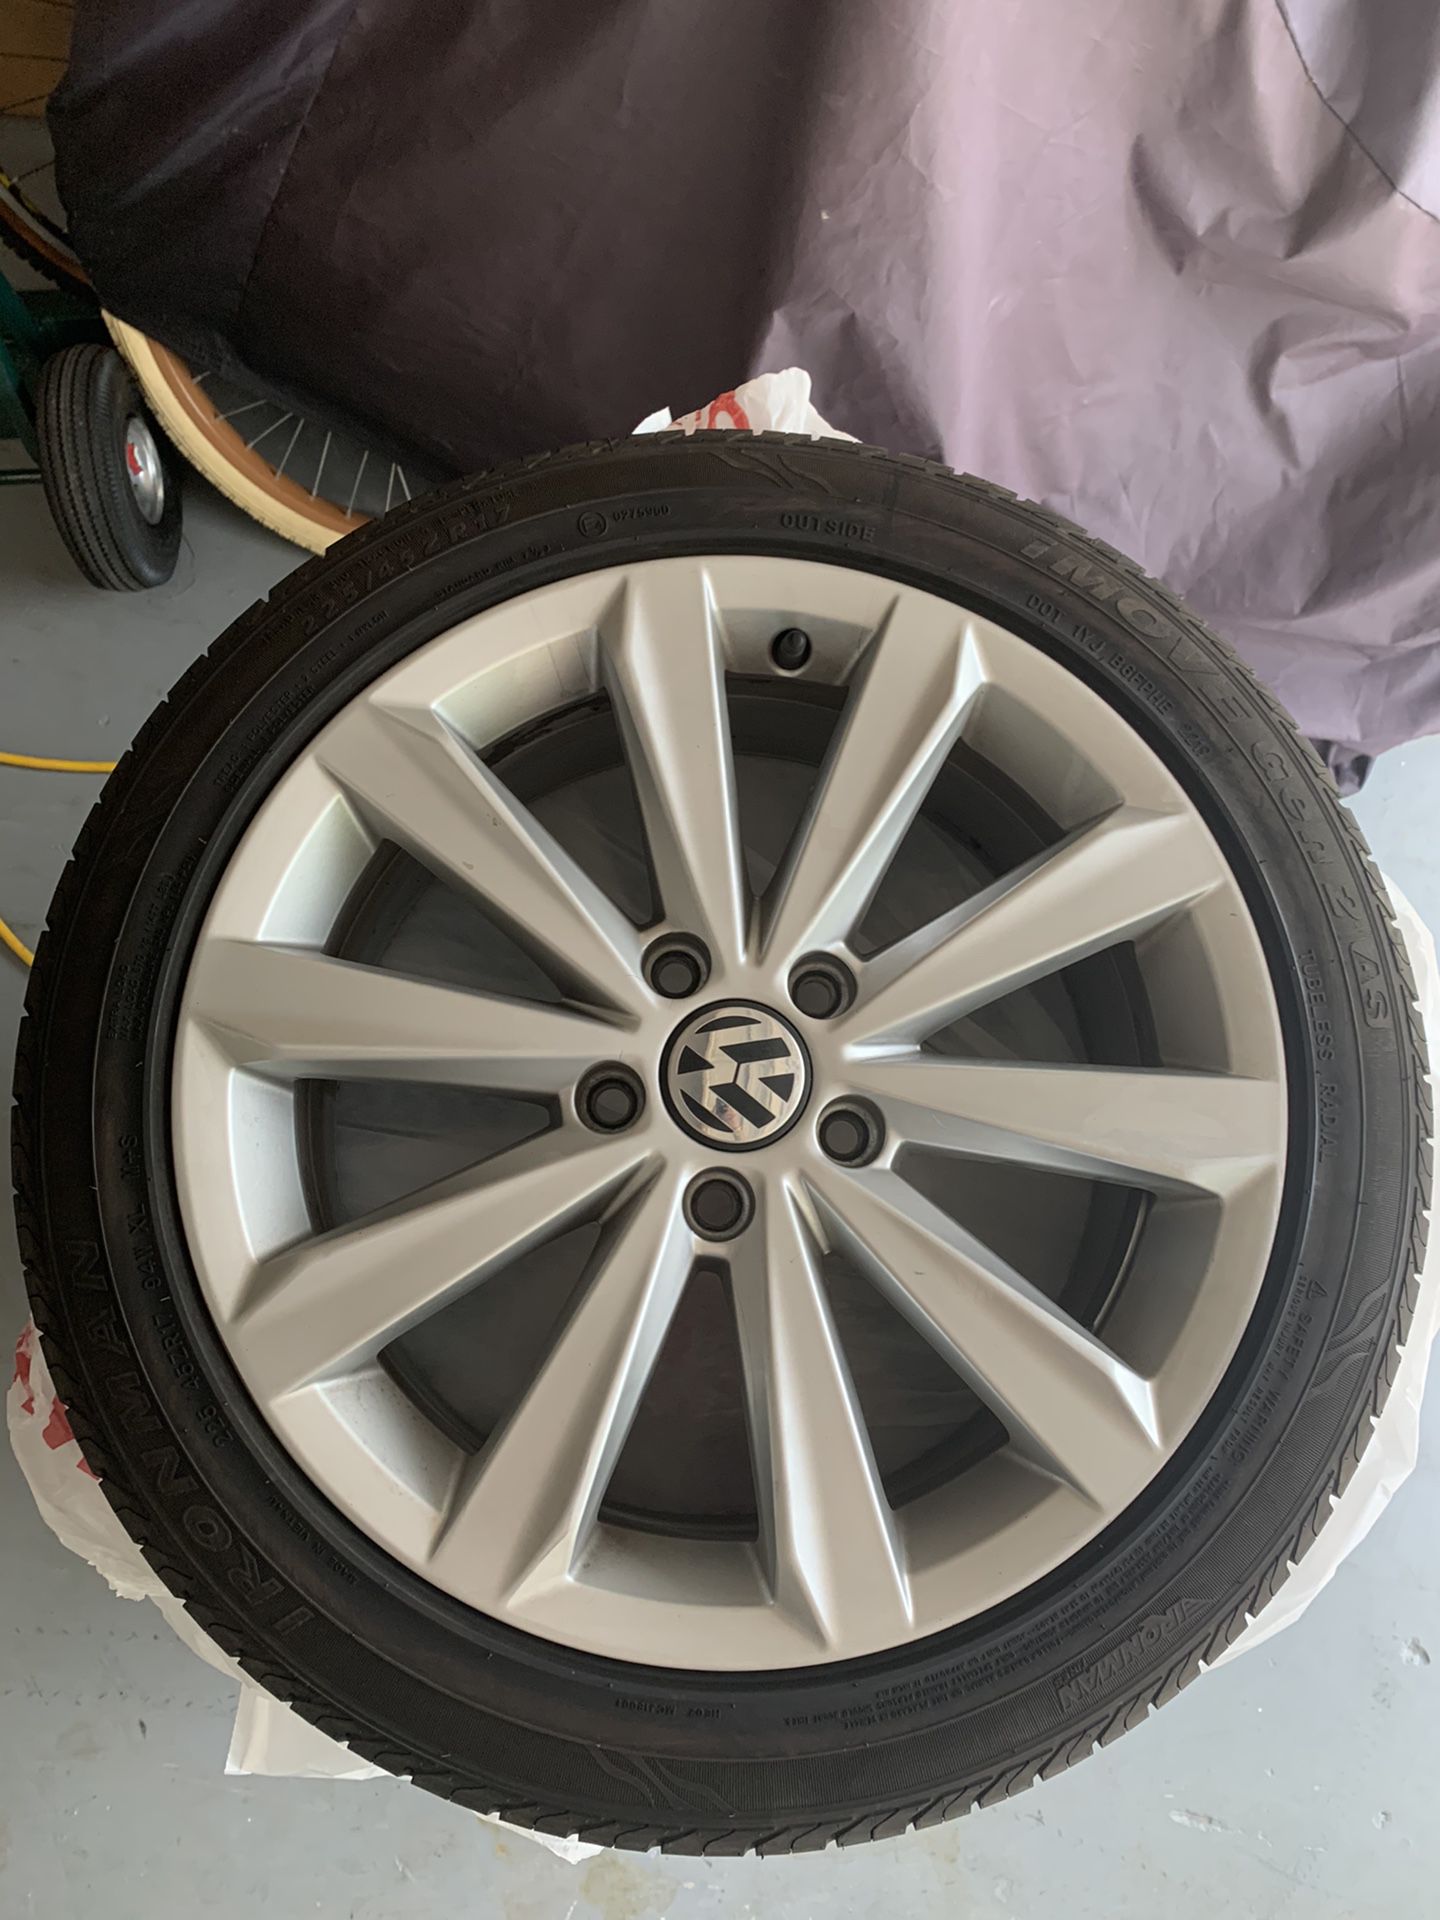 2014 VW golf wheels and tires